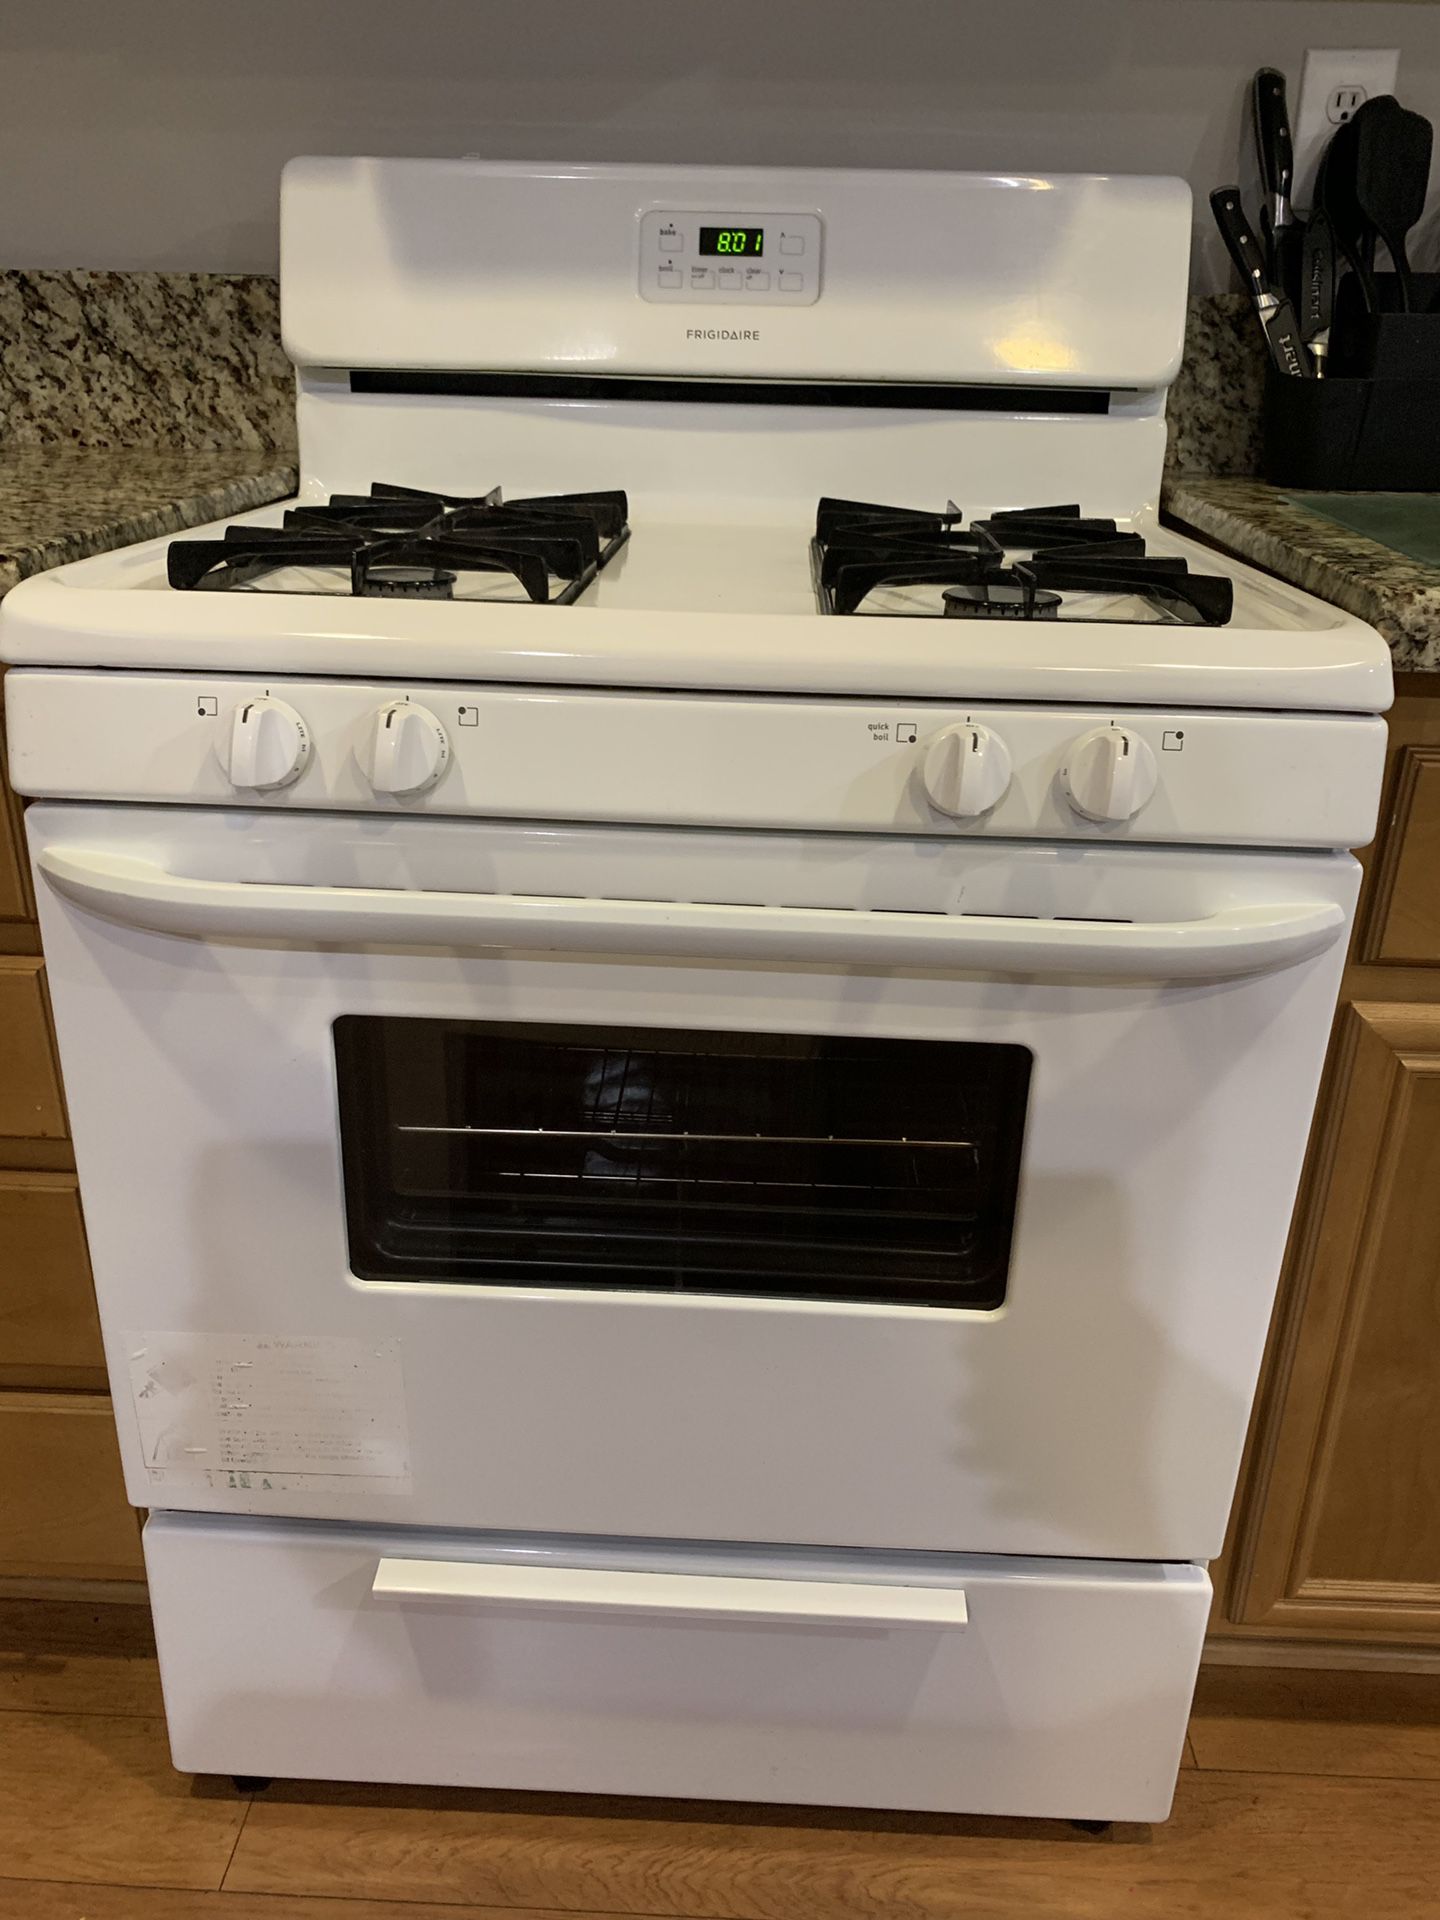 Kitchen Appliances: Gas stove, microwave, and dishwasher